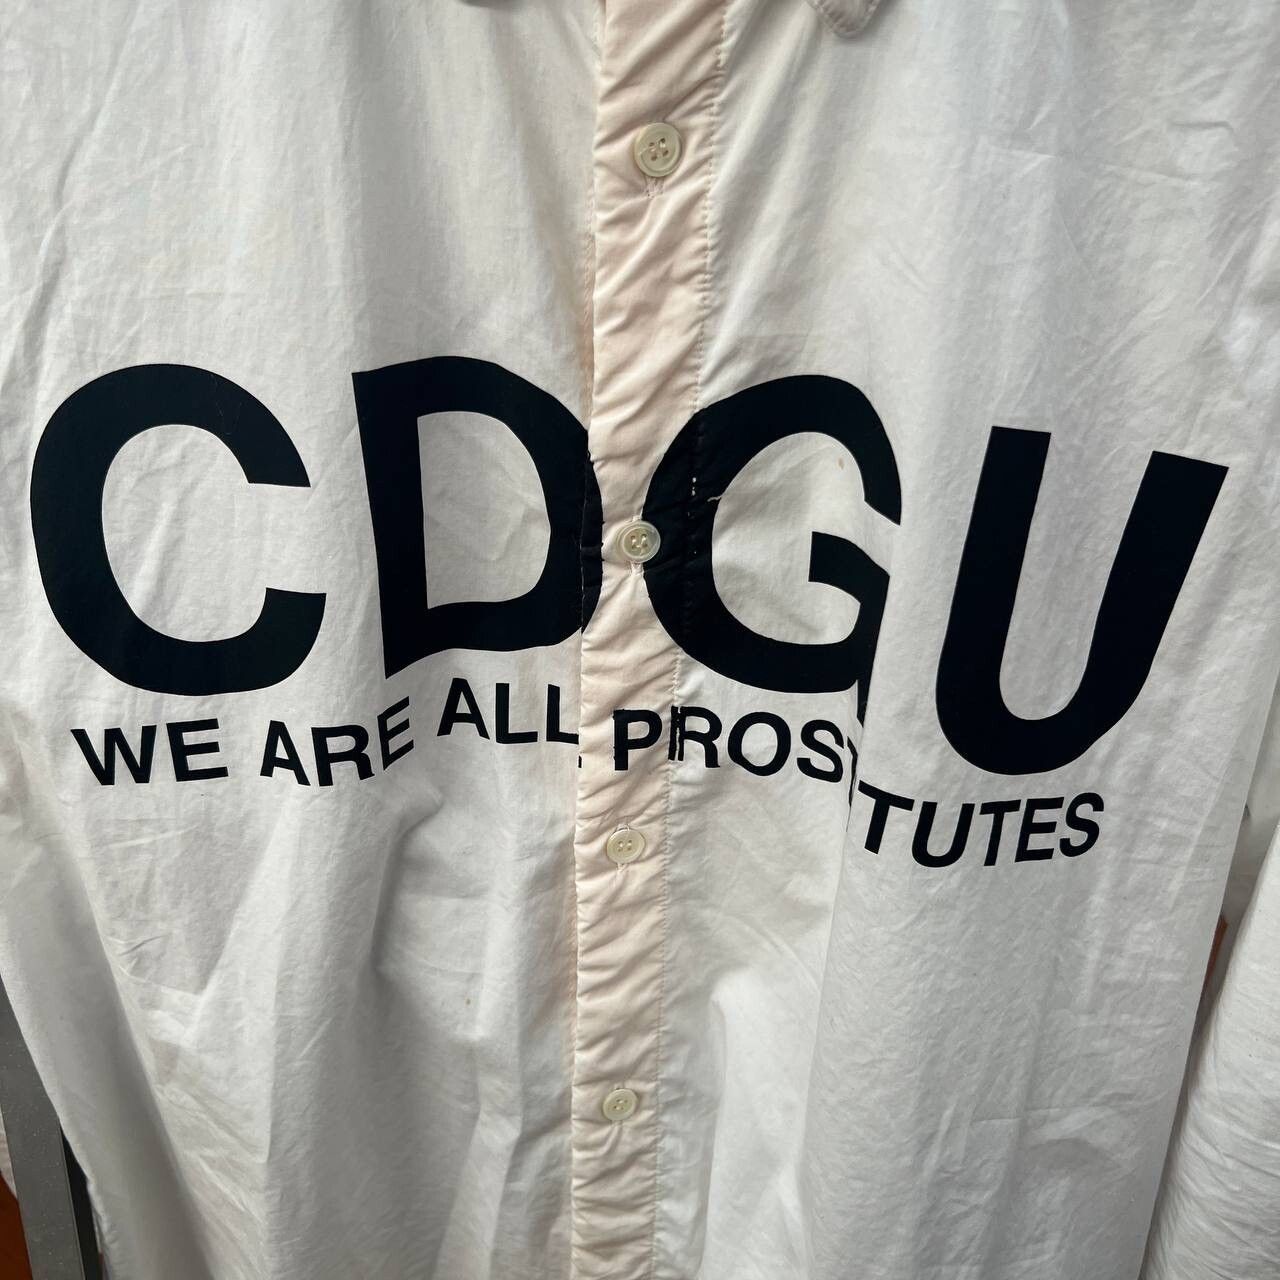 Undercover CDGU “WE ARE ALL PROSTITUTES” Long Sleeve Shirt Size US L / EU 52-54 / 3 - 6 Thumbnail